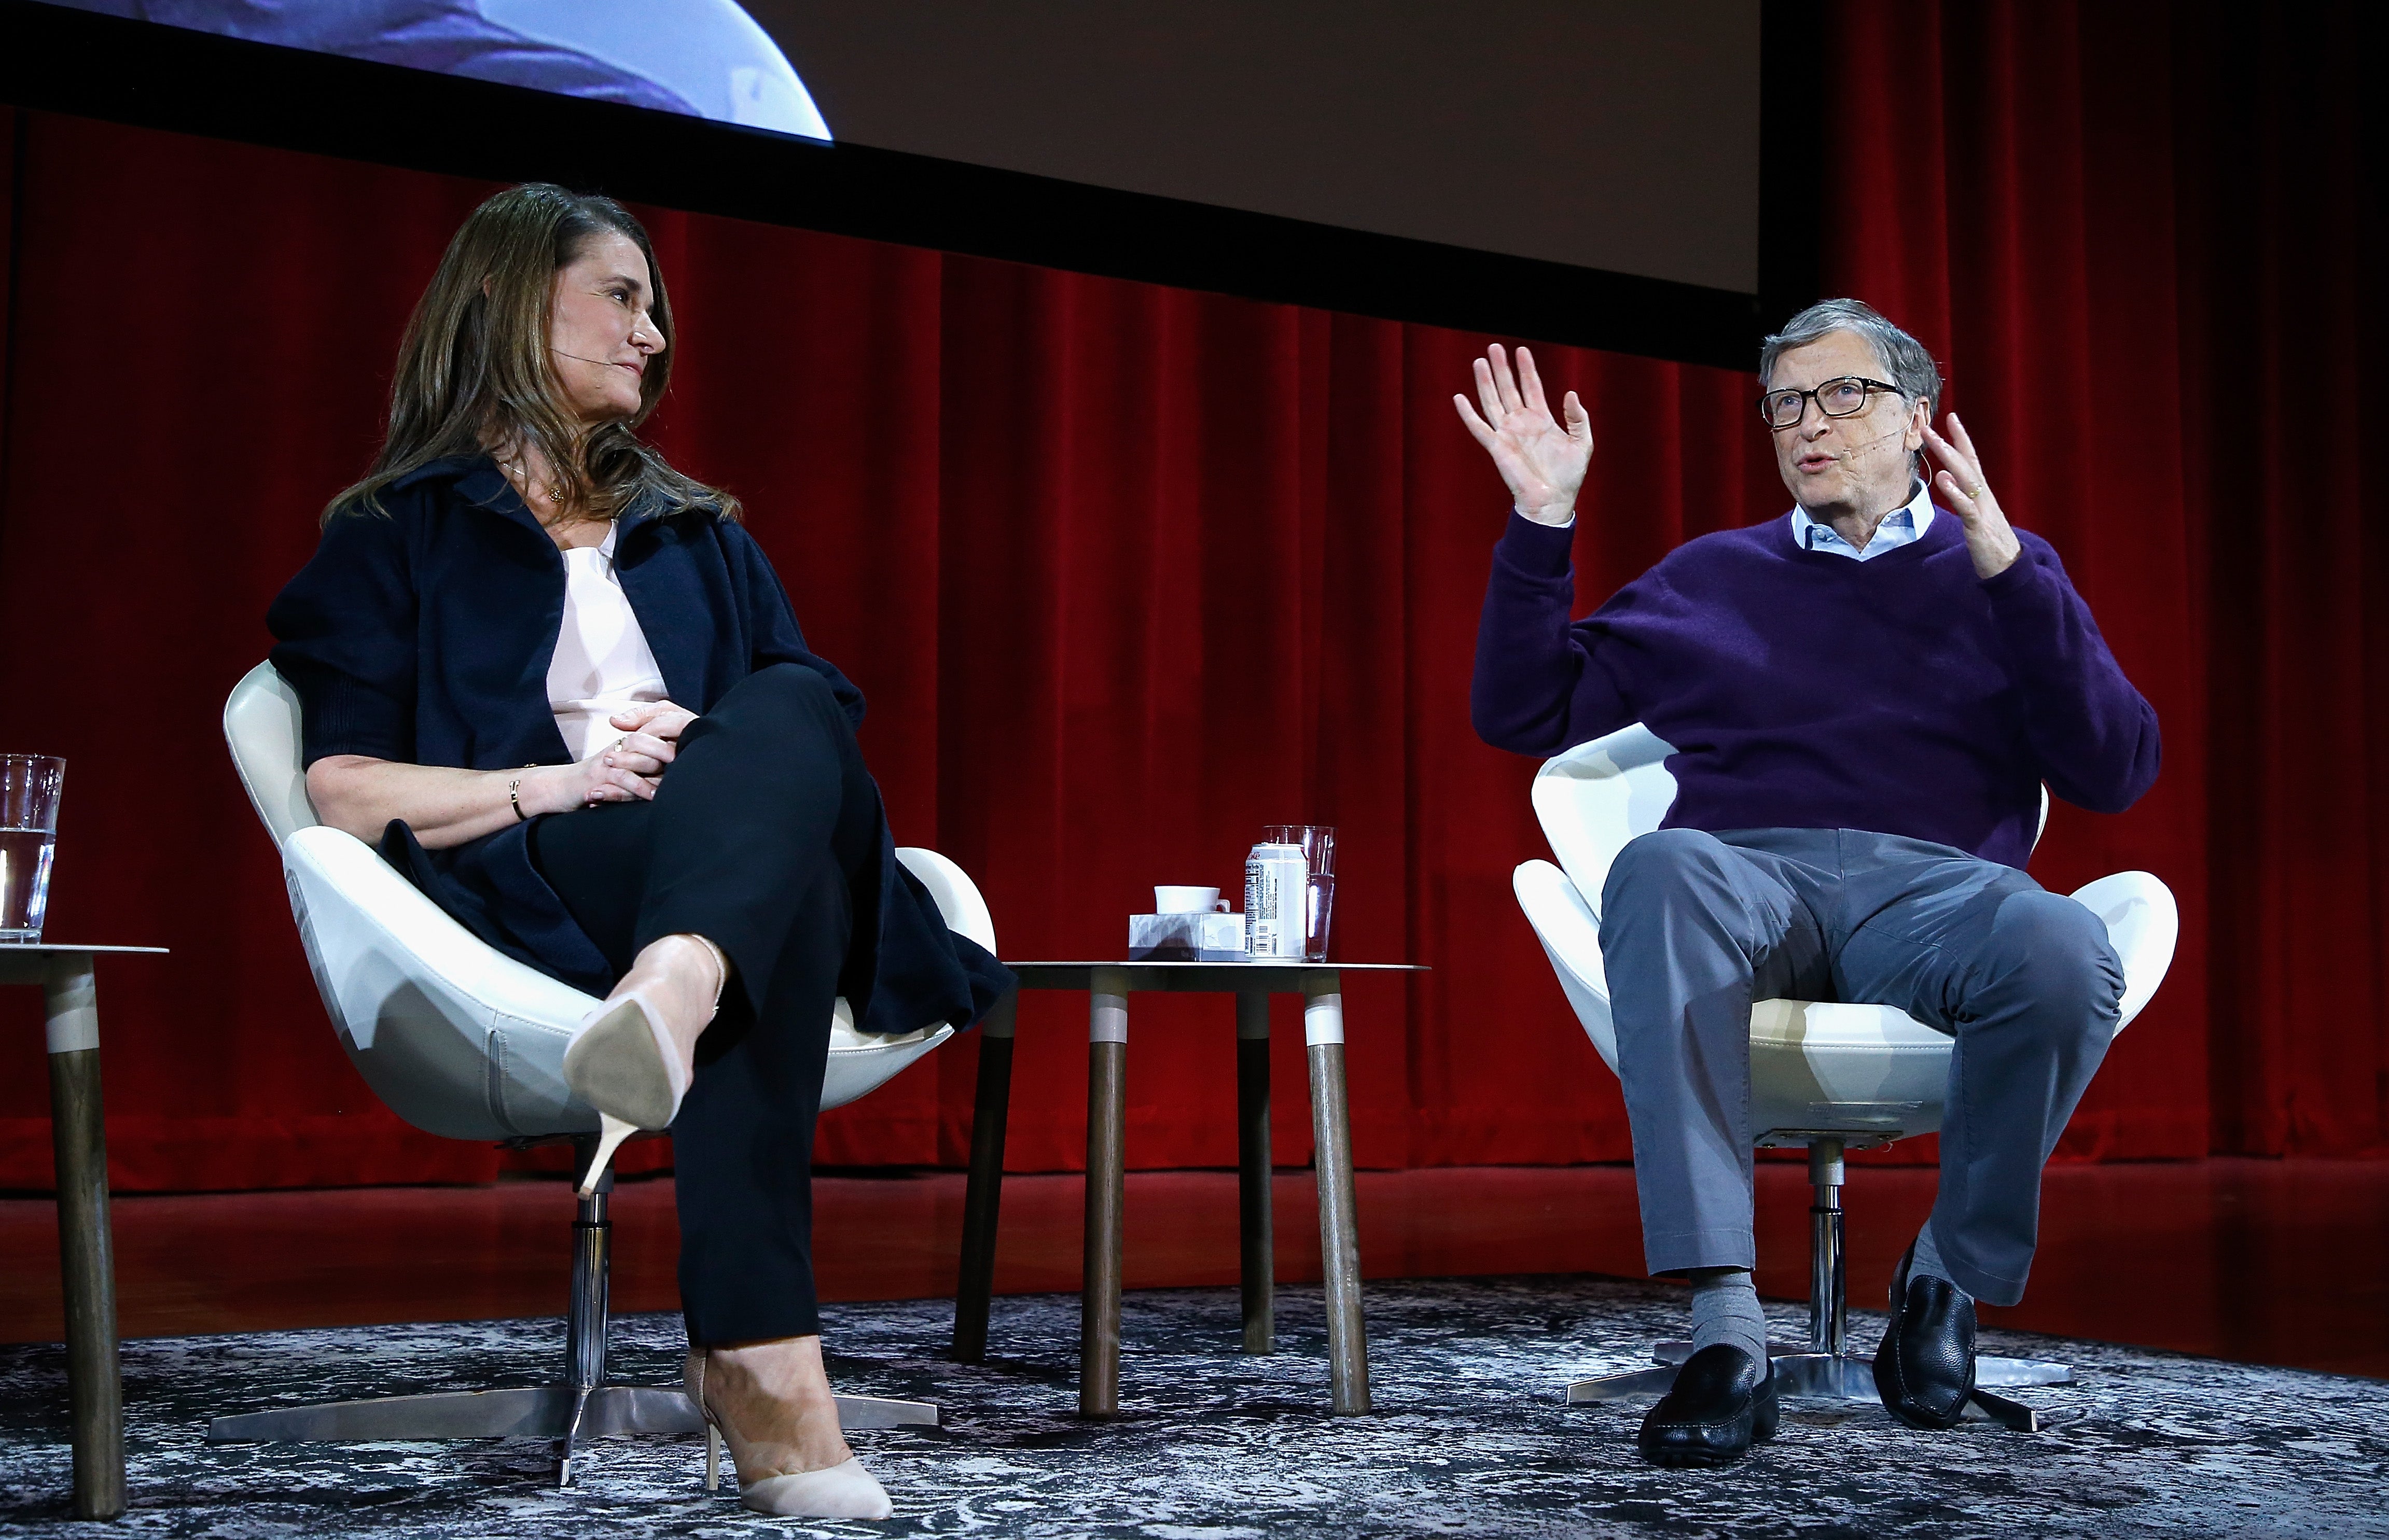 File Image: Melinda Gates and Bill Gates speak during the Lin-Manuel Miranda In conversation with Bill &amp; Melinda Gates panel at Hunter College on February 13, 2018 in New York City